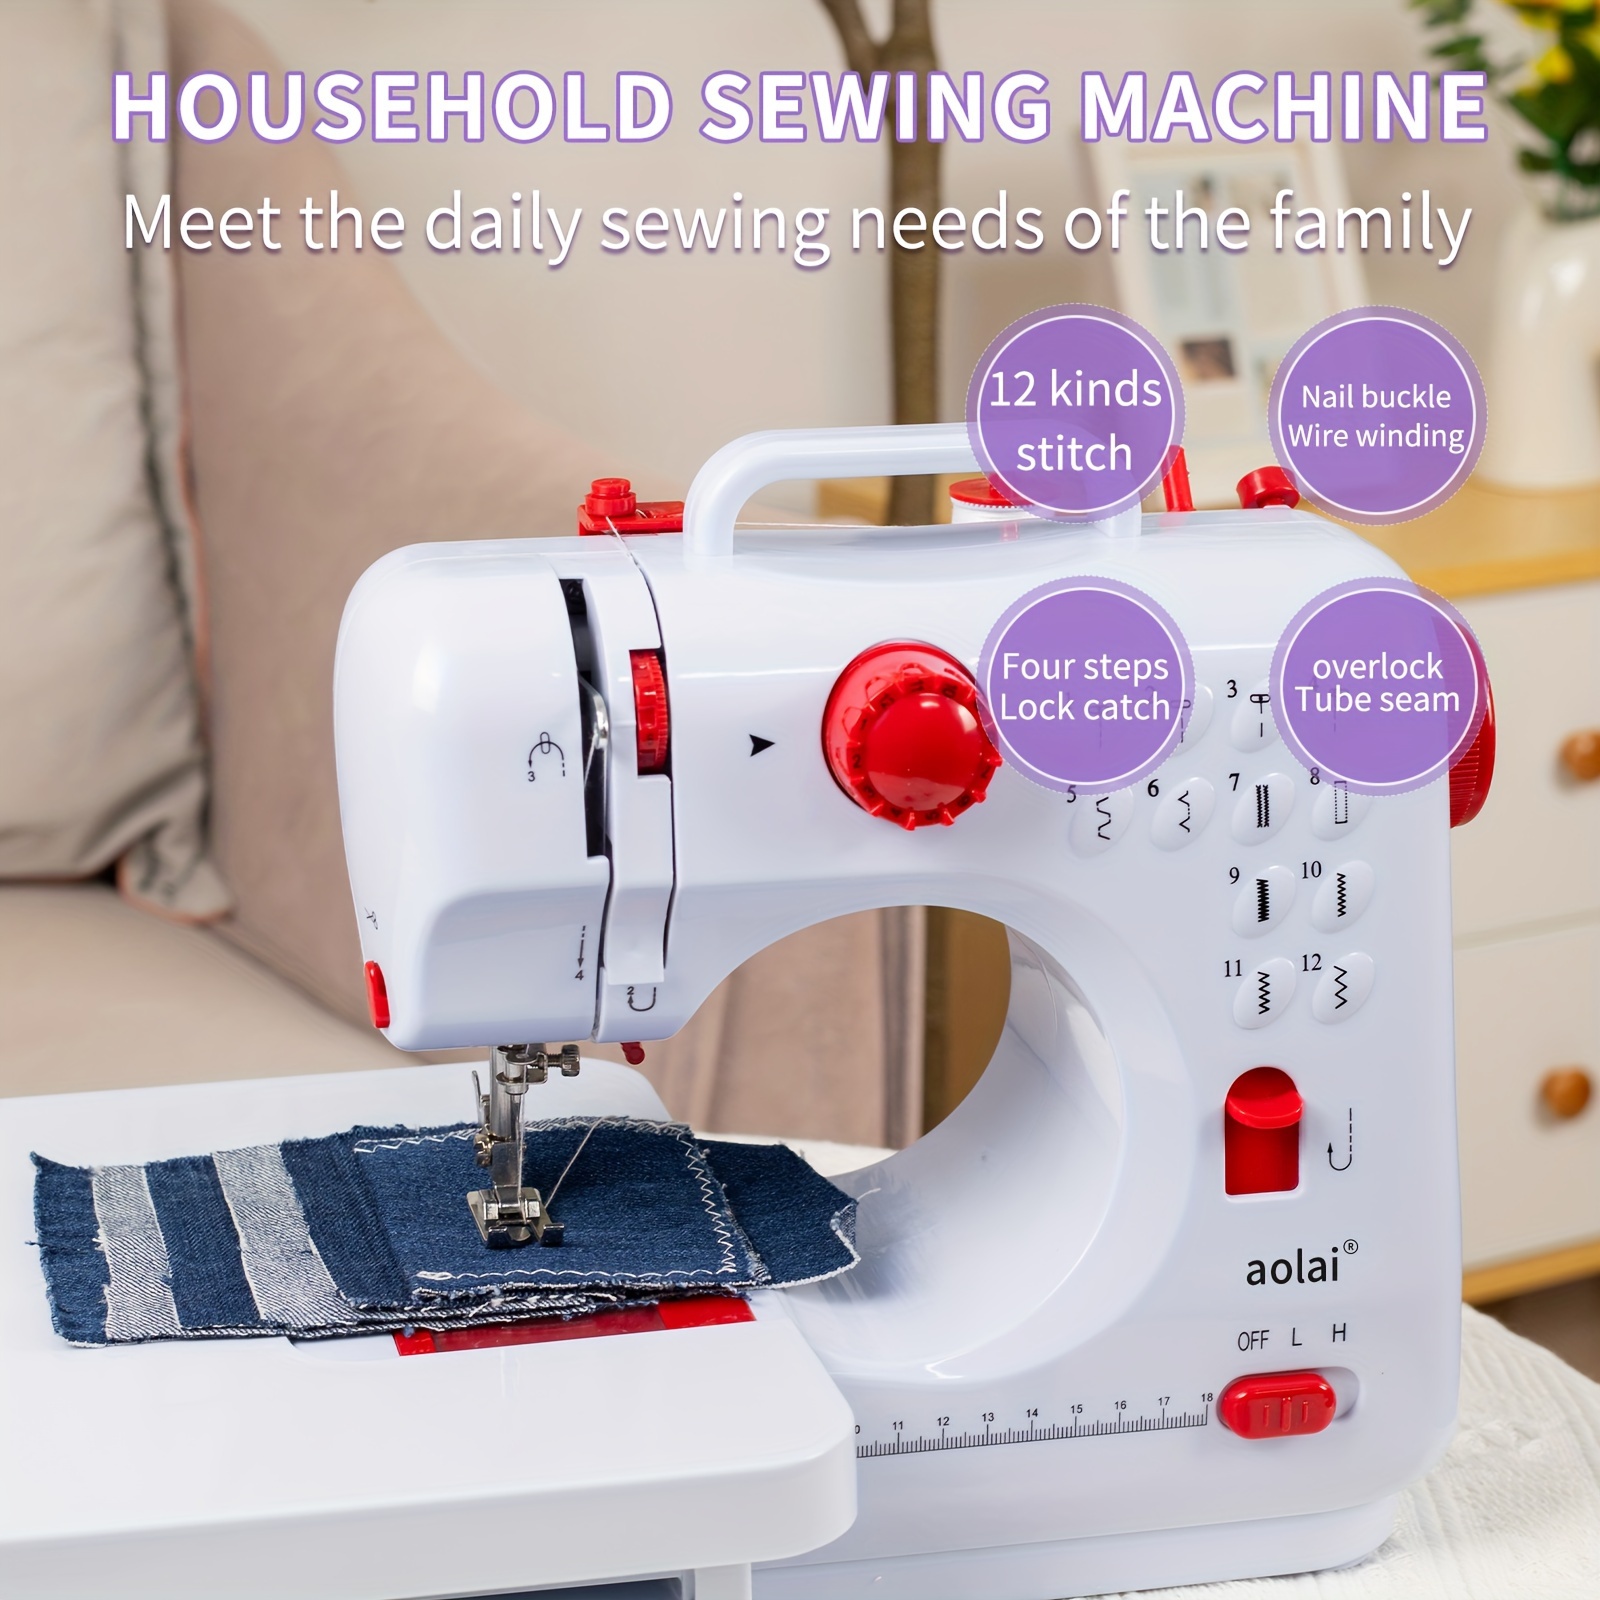 

Red Household Sewing Machine: 12 Stitch Options, 4 Step Lock Catch, And Overlock Tube Seam For Your Sewing Needs